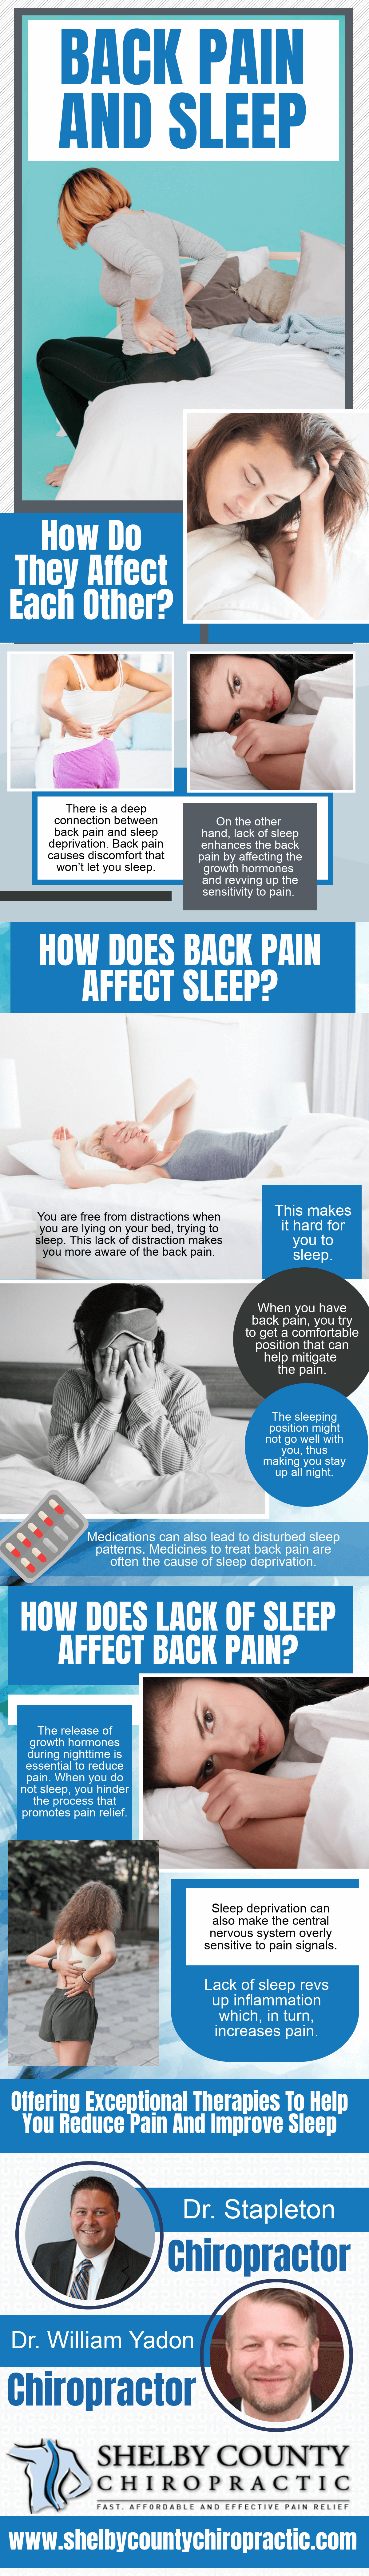 Back Pain and Sleep - How they Affect Each Other